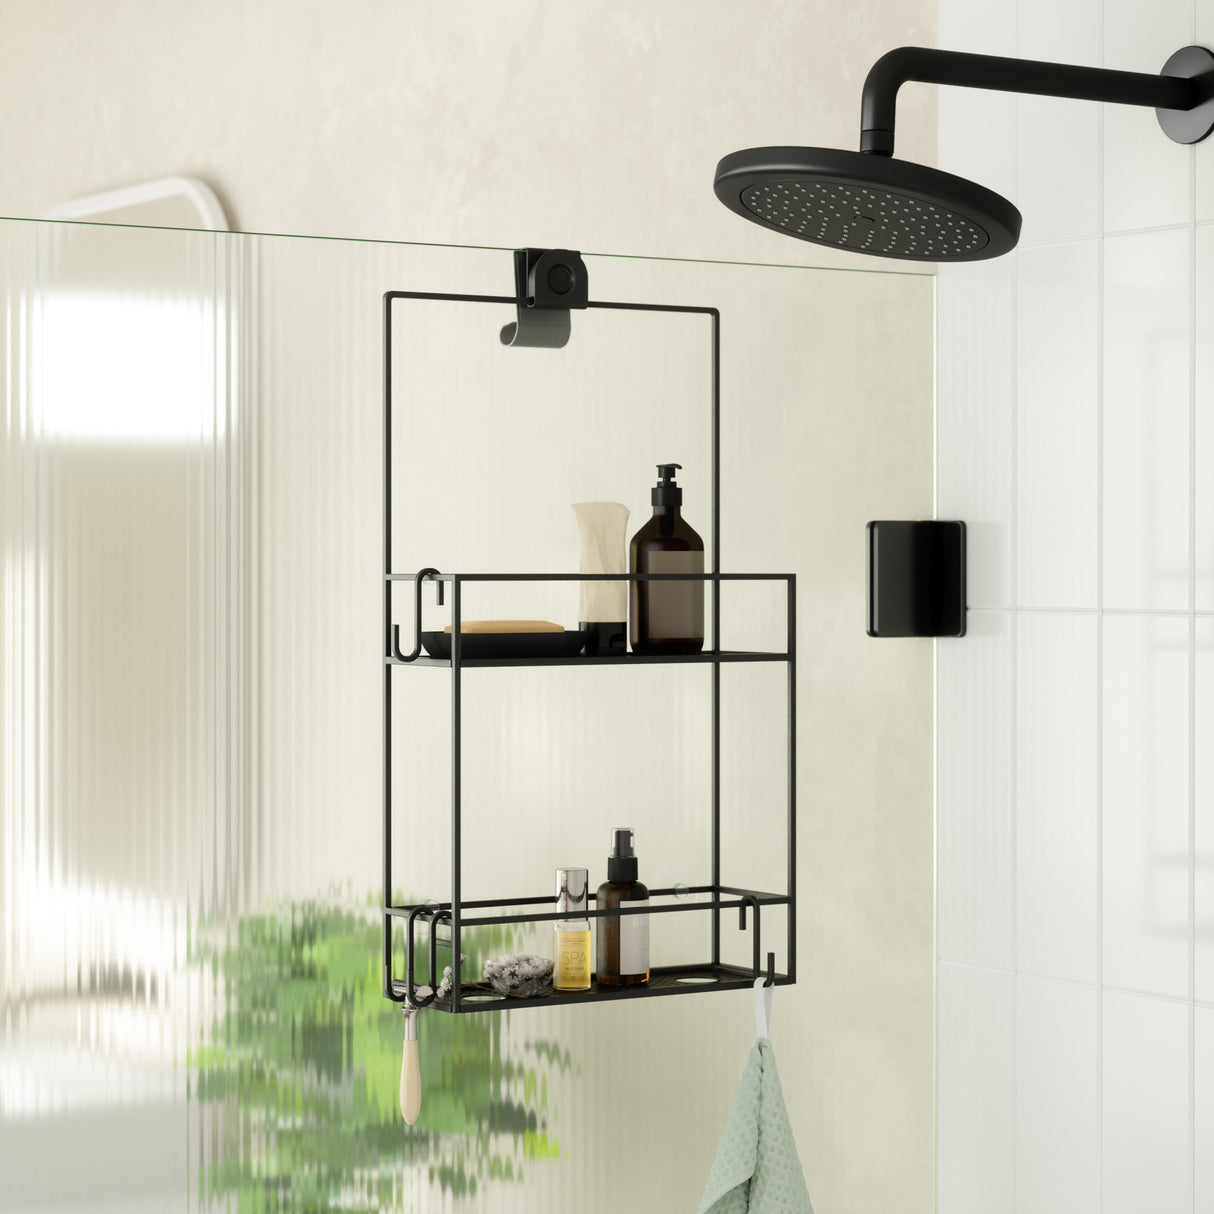 Discounted price Cubiko Shower Caddy, shower caddt 